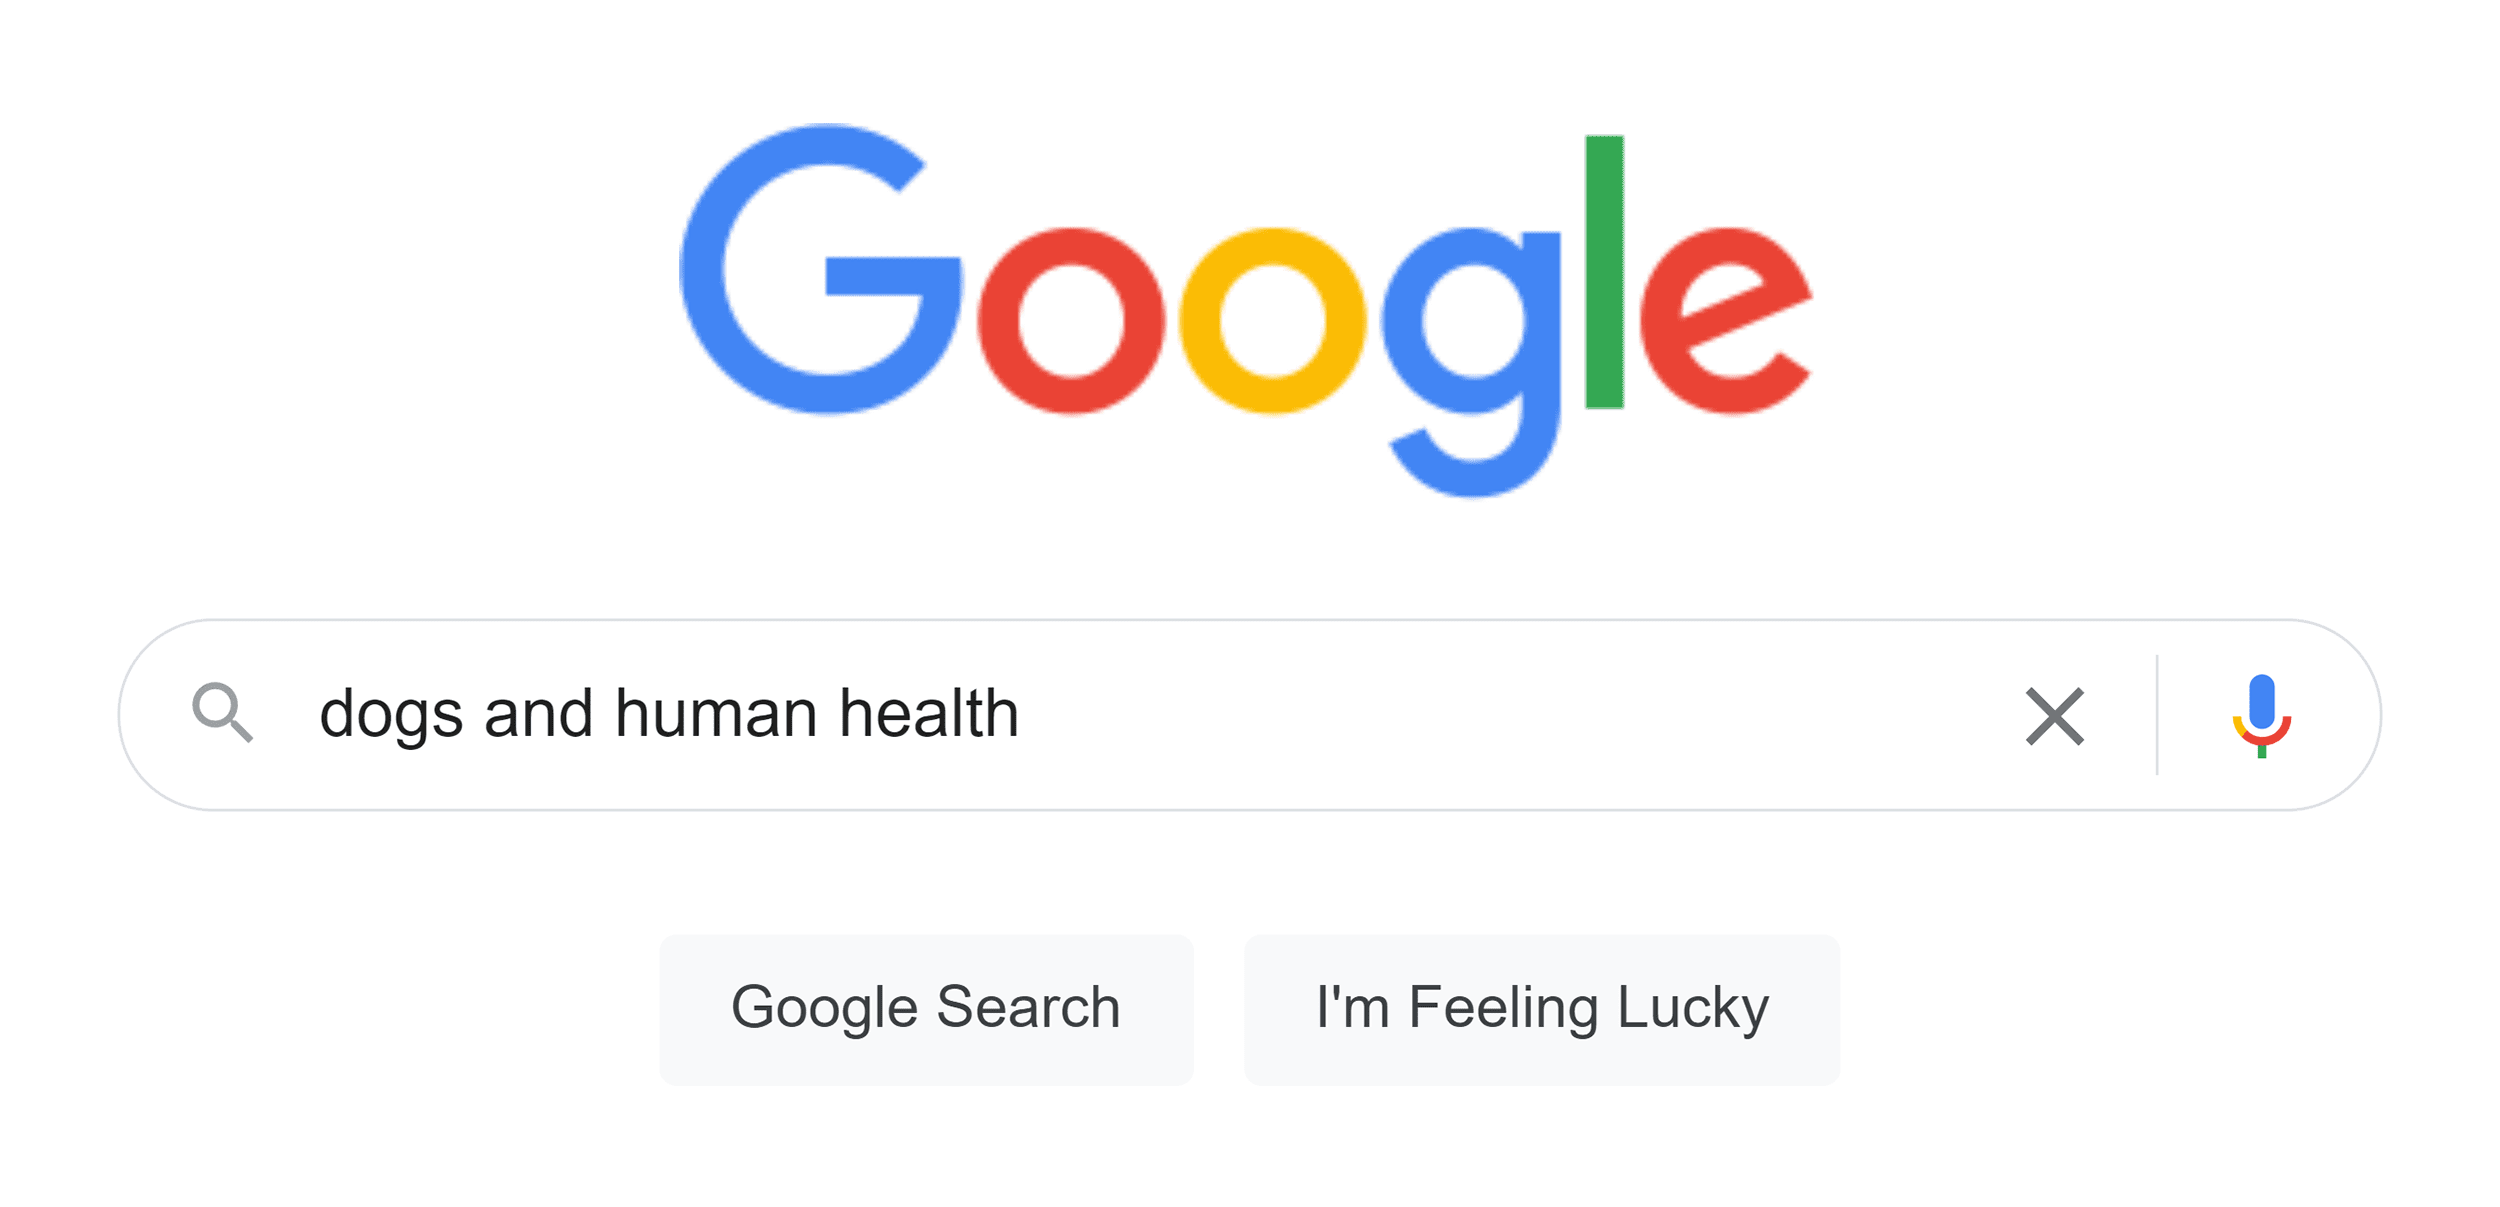 Google Search – Dogs and human health